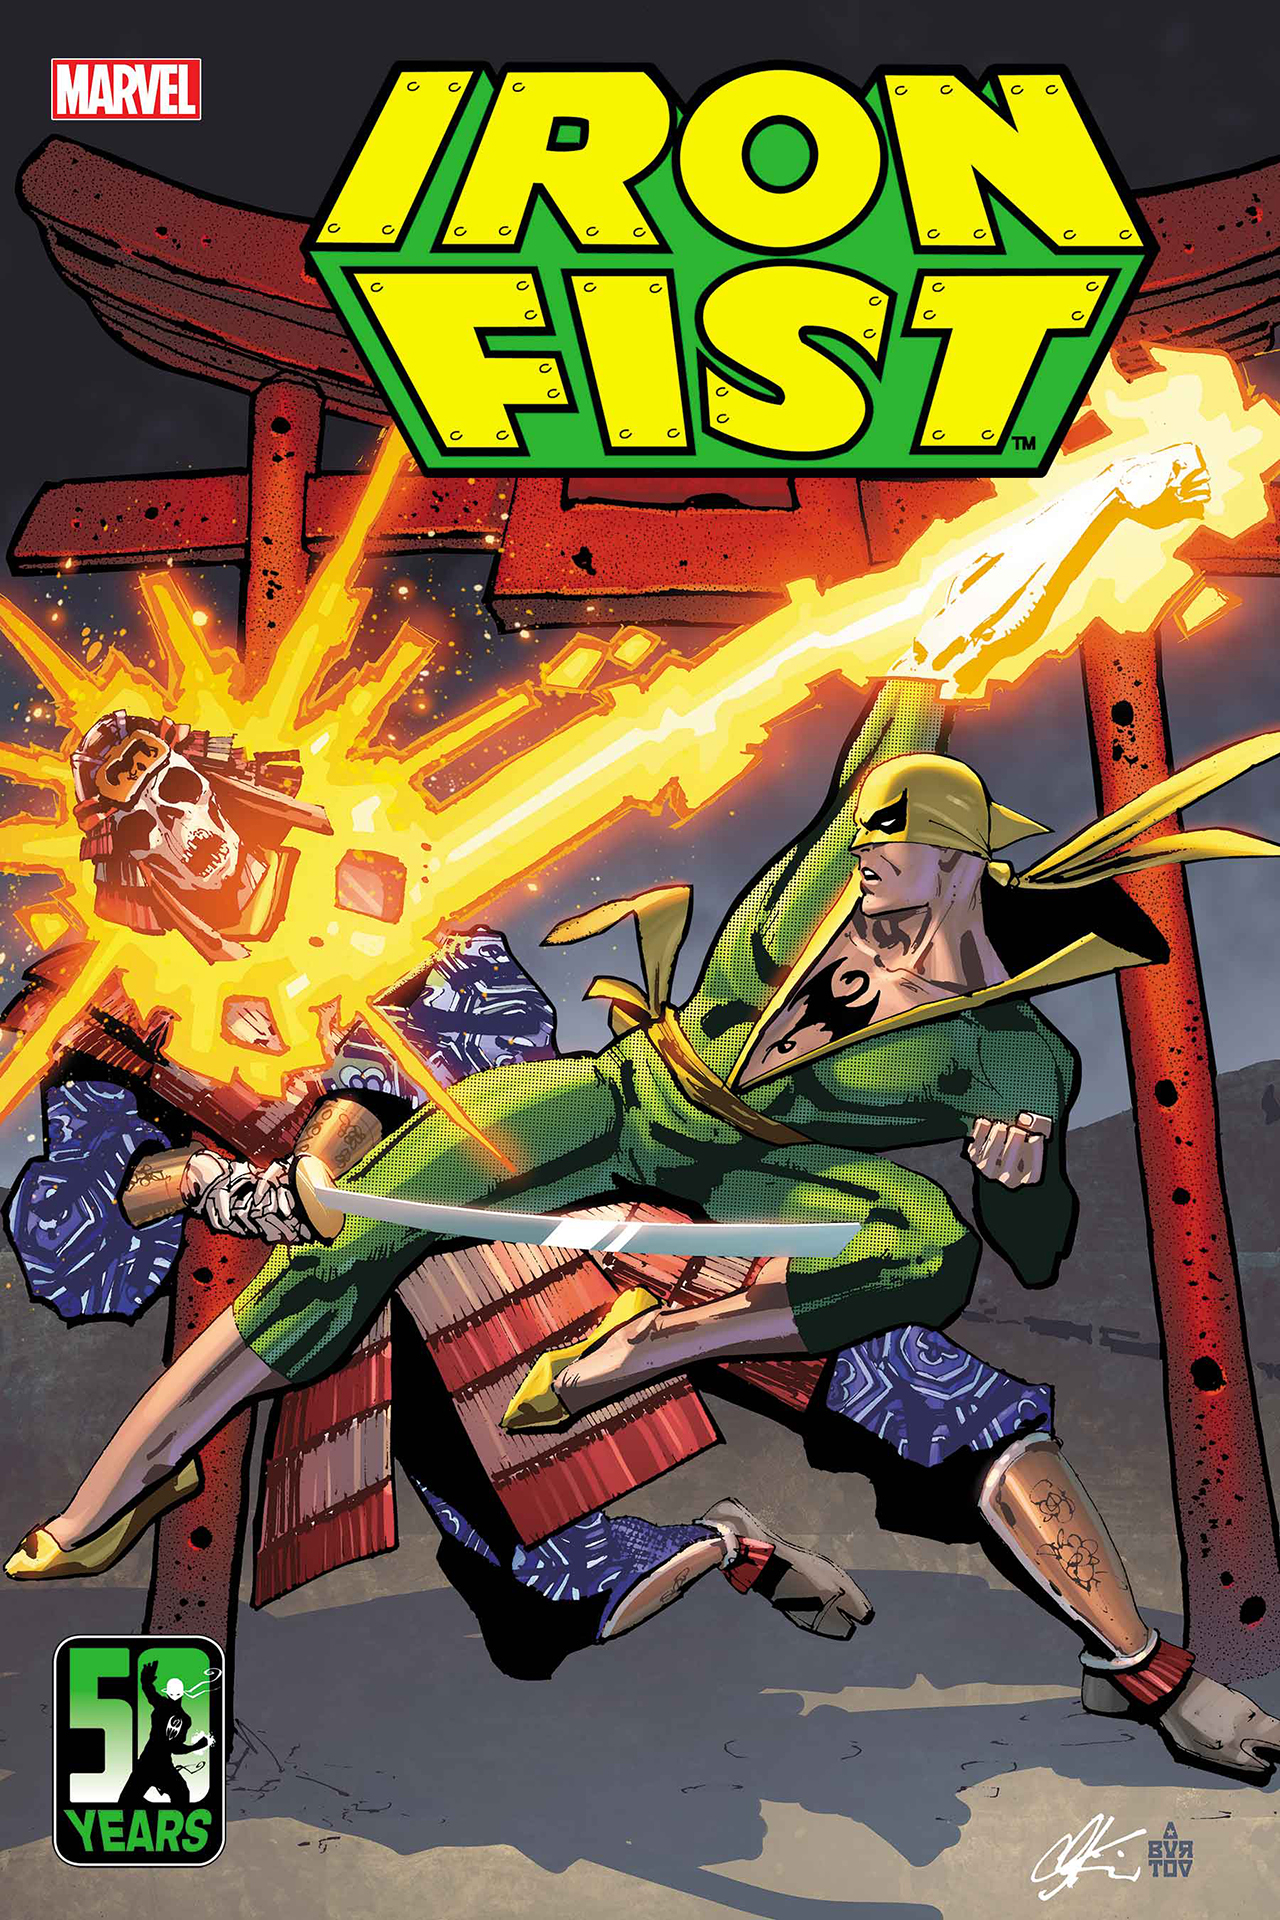 Iron Fist 50th Anniversary Special #1 cover art by Howard Chaykin